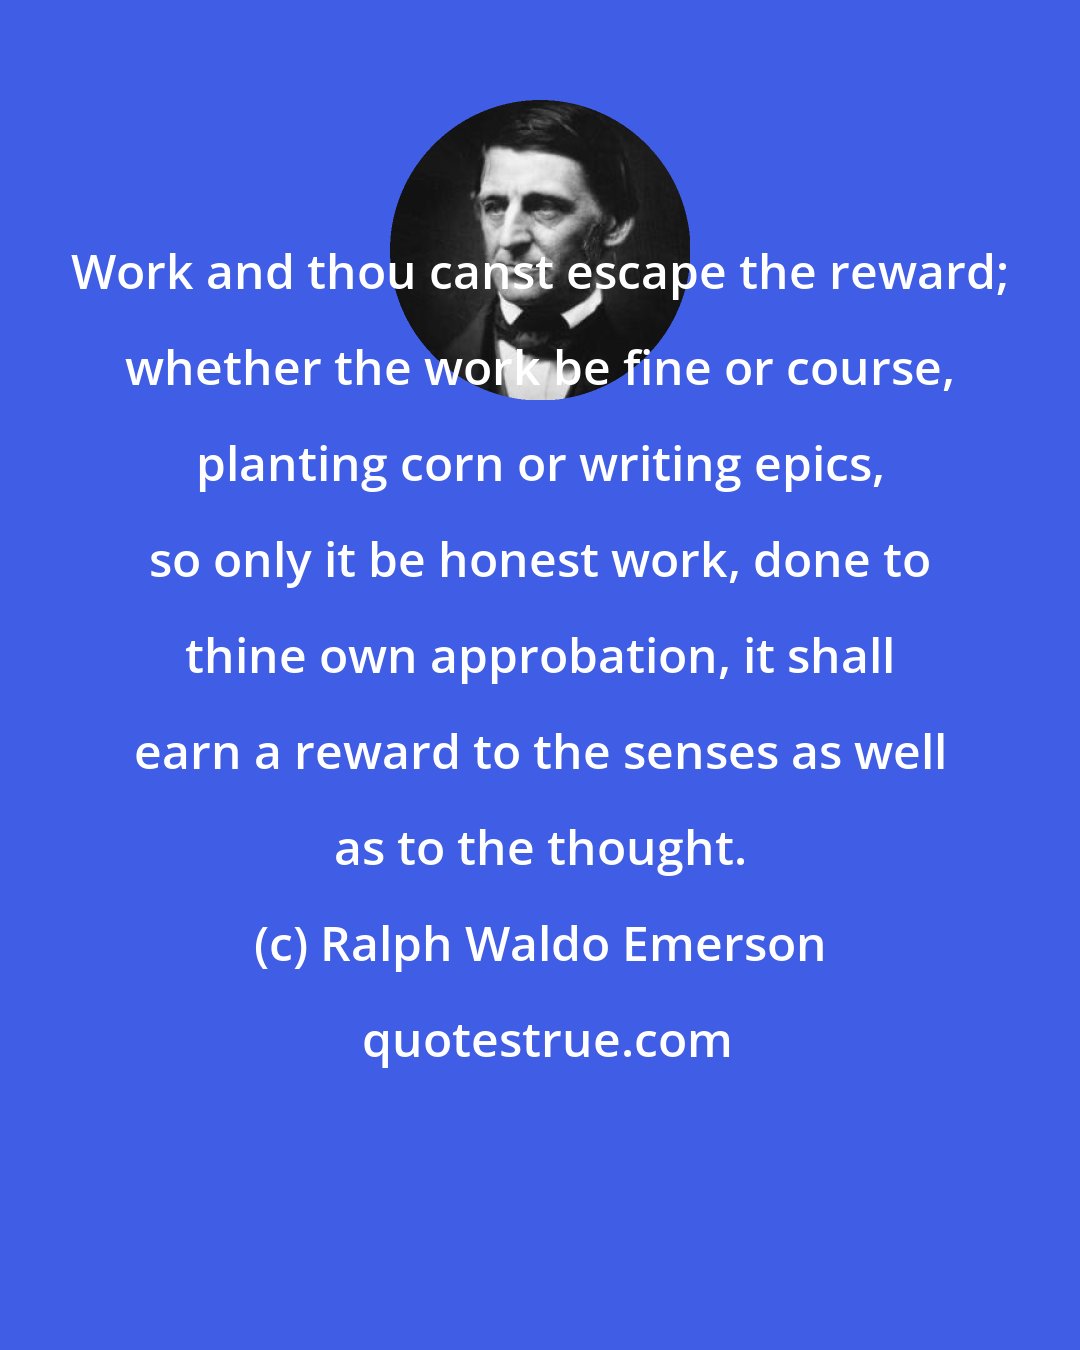 Ralph Waldo Emerson: Work and thou canst escape the reward; whether the work be fine or course, planting corn or writing epics, so only it be honest work, done to thine own approbation, it shall earn a reward to the senses as well as to the thought.